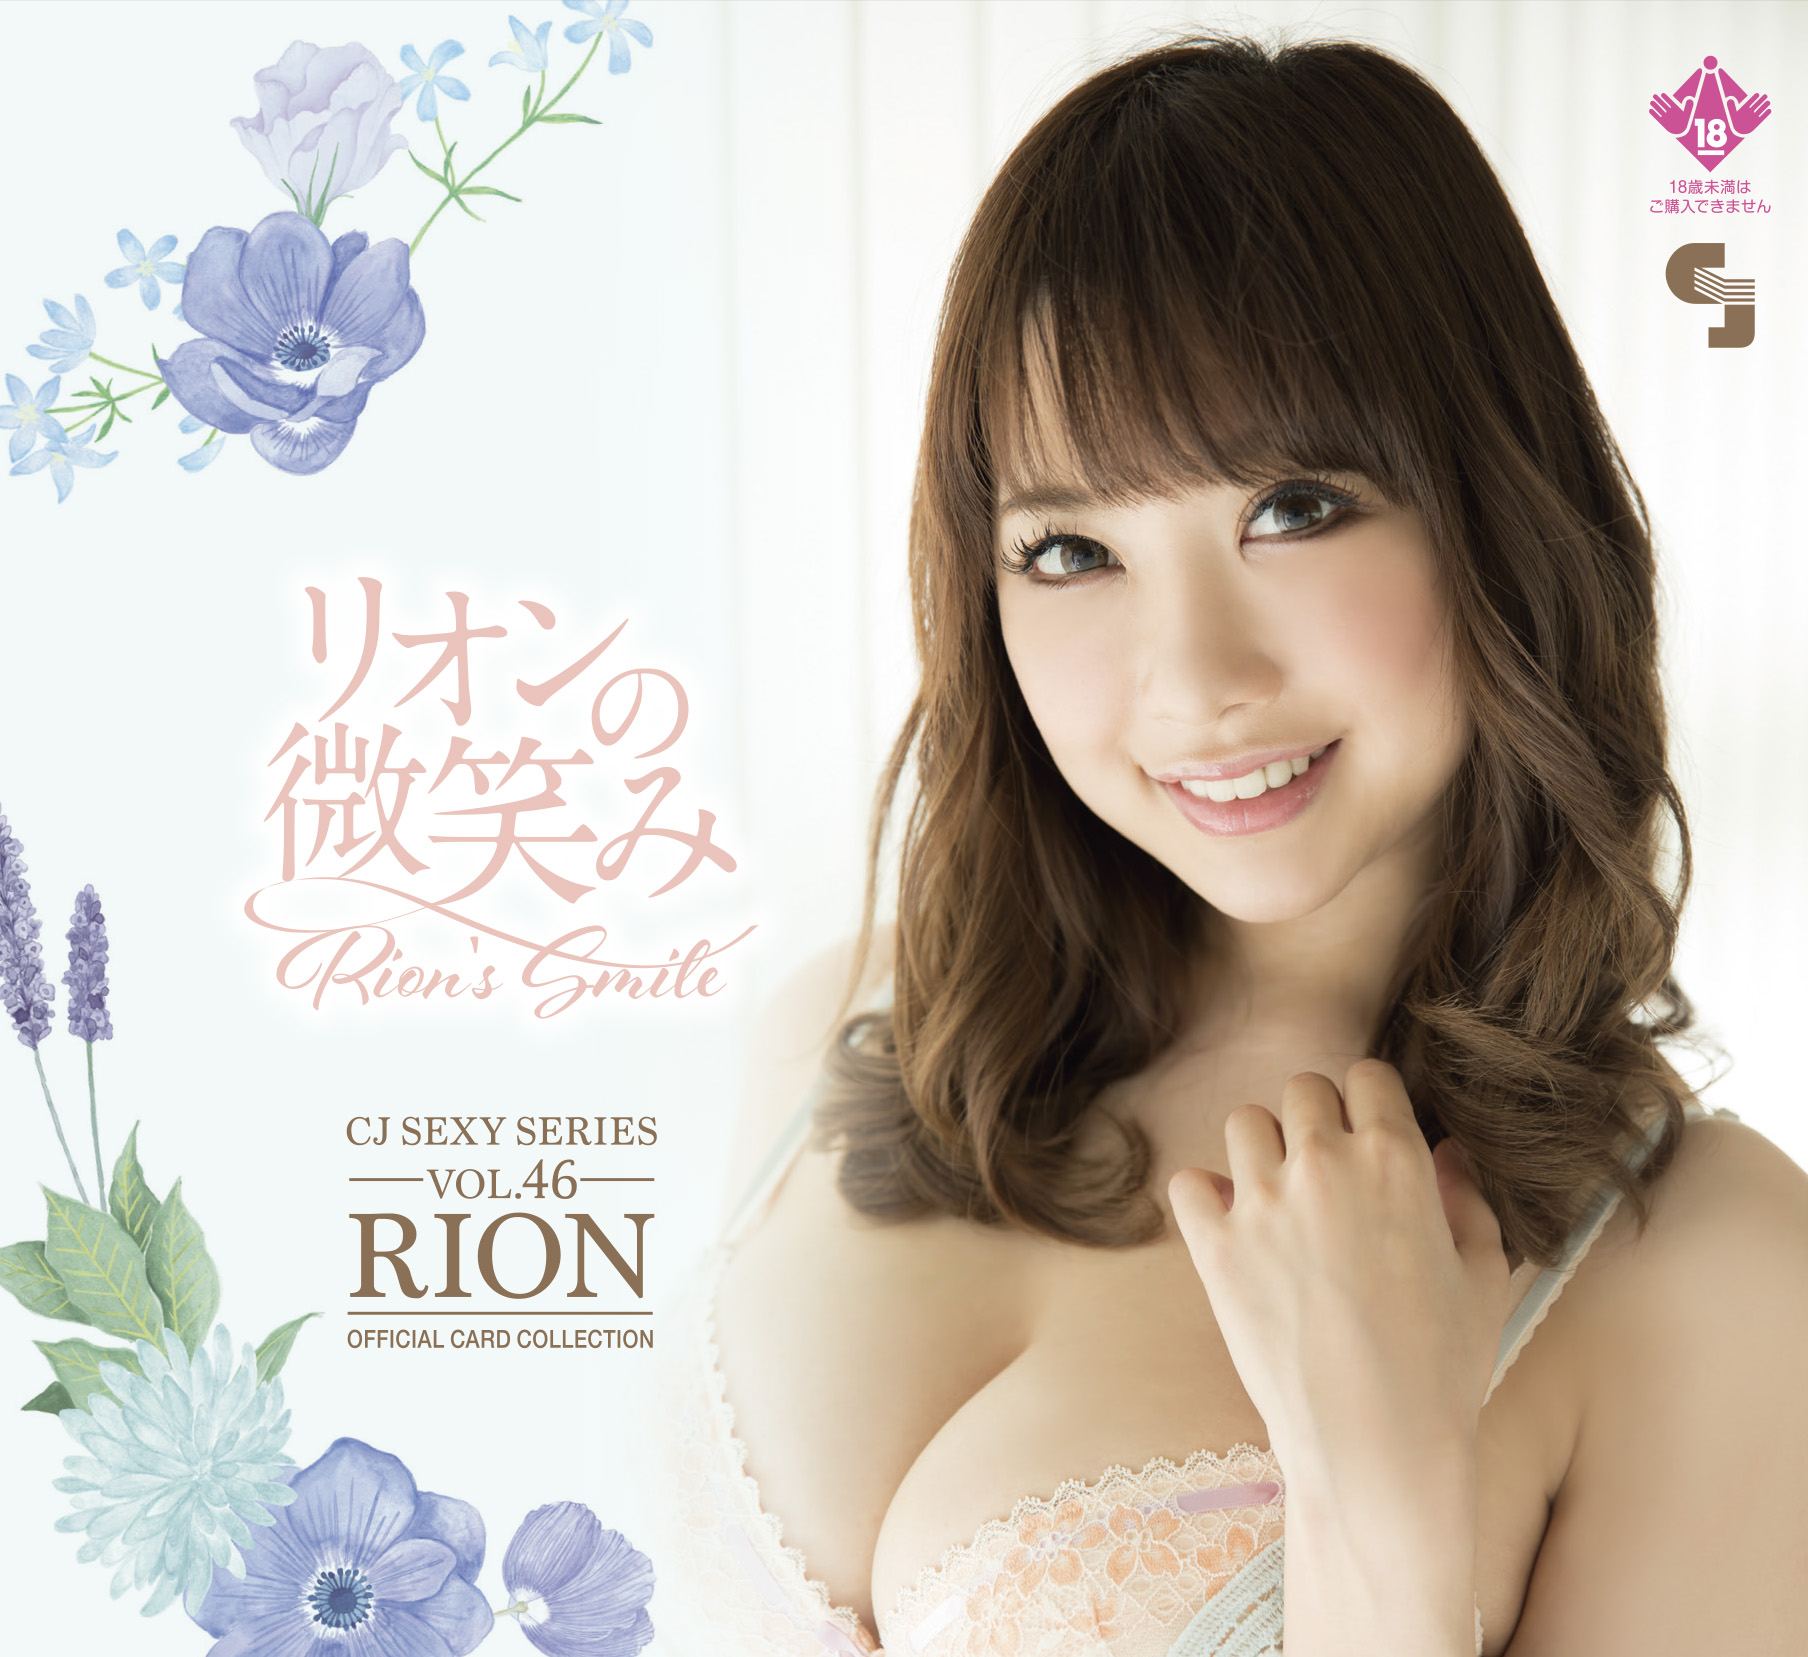 CJ SEXY CARD SERIES VOL. 46 RION OFFICIAL CARD COLLECTION -RION'S SMILE- (SET OF 12 PACKS) Jyutoku